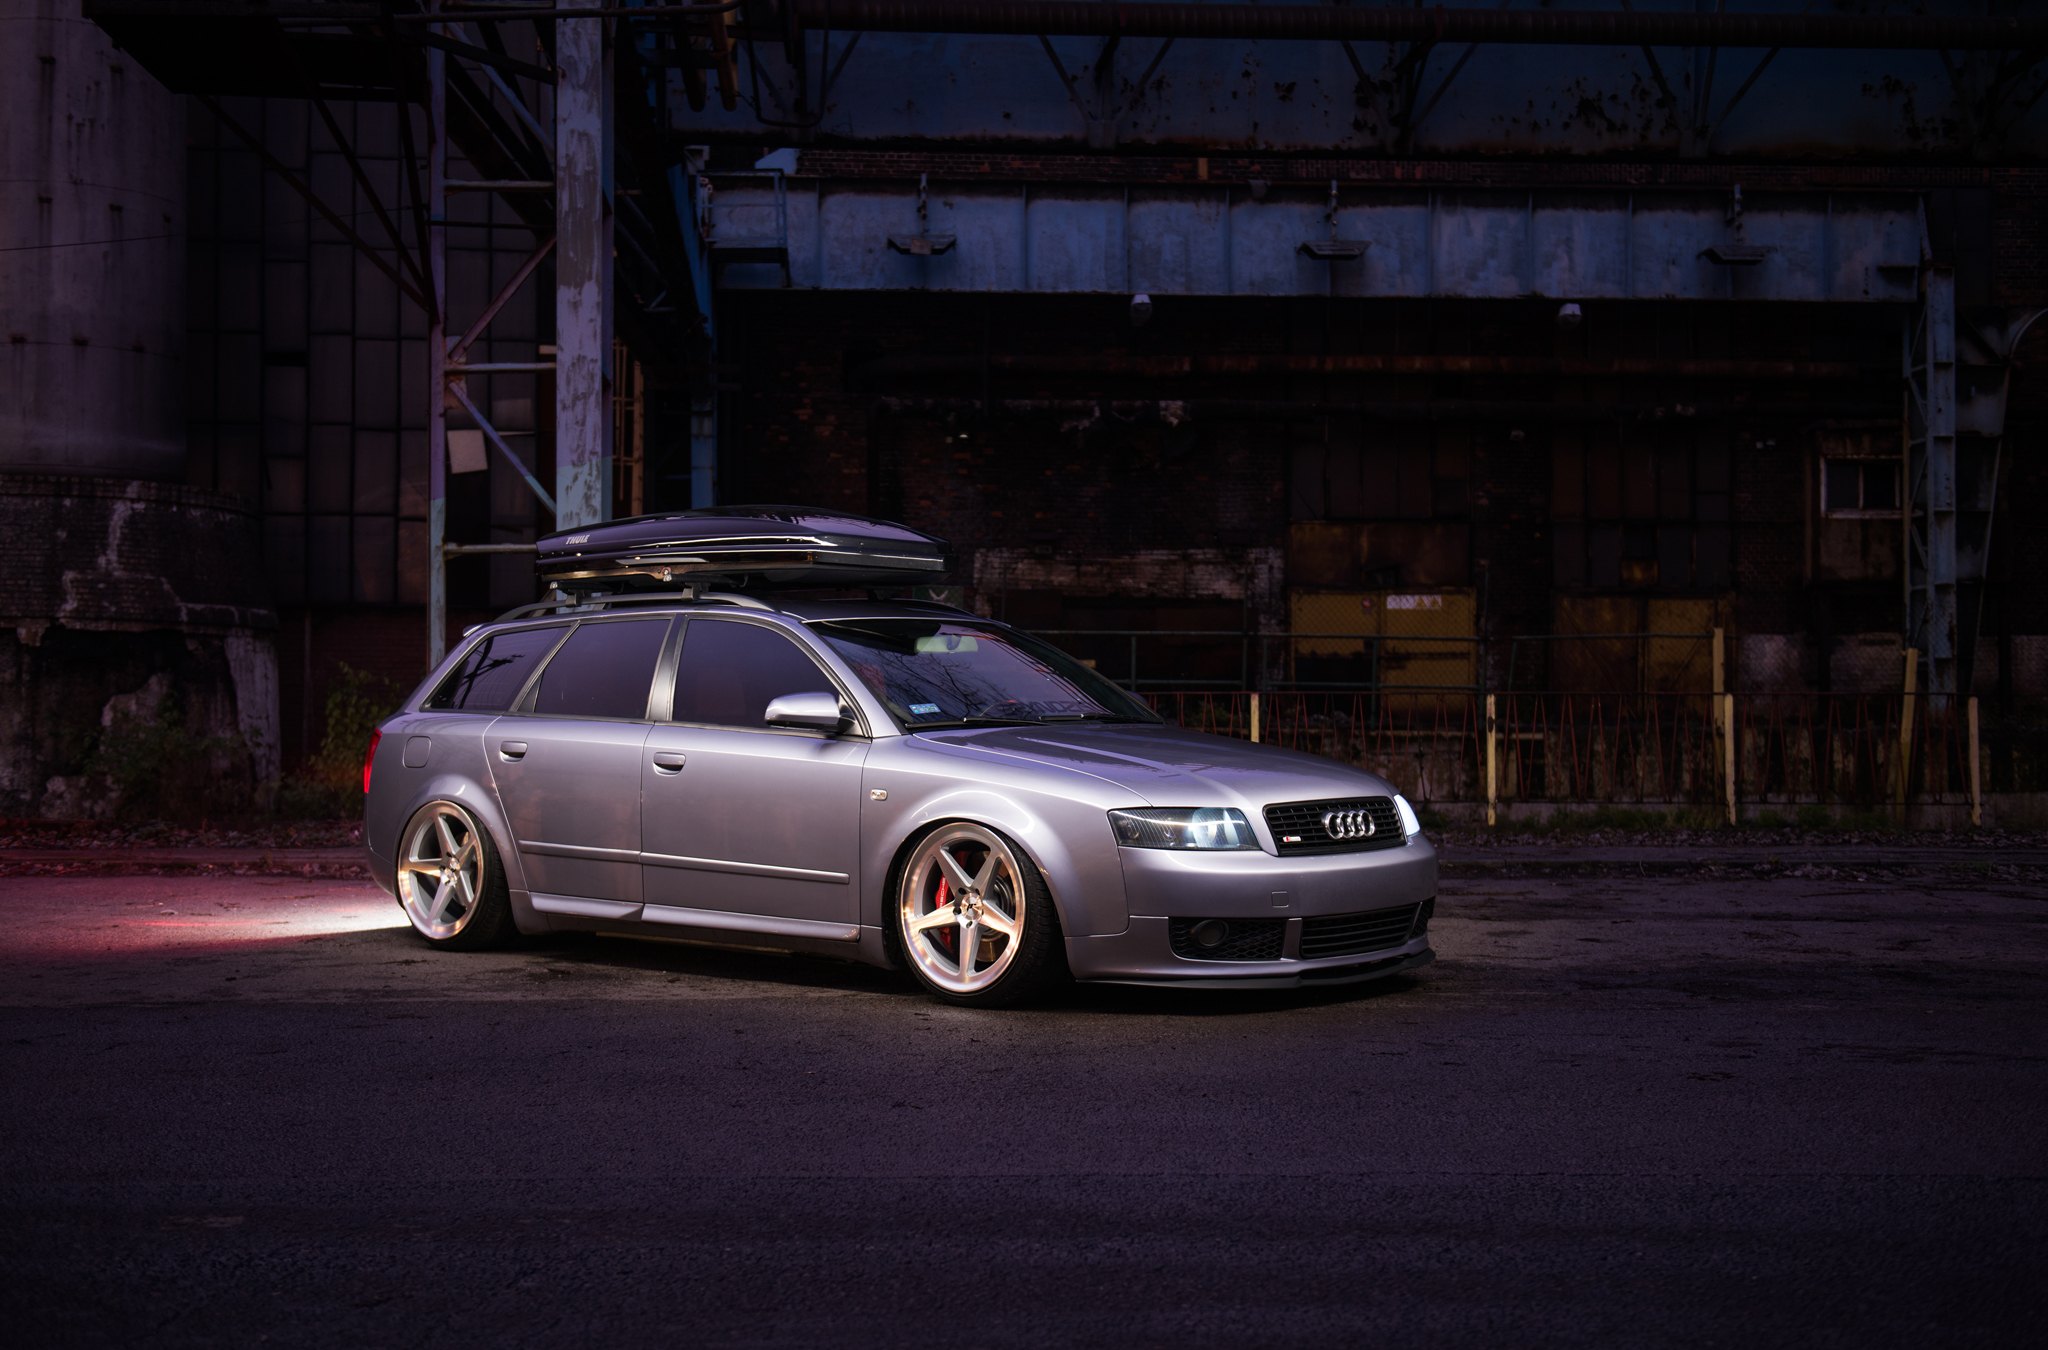 Thule Roof Rack on Gray Audi A4 - Photo by JR Wheels